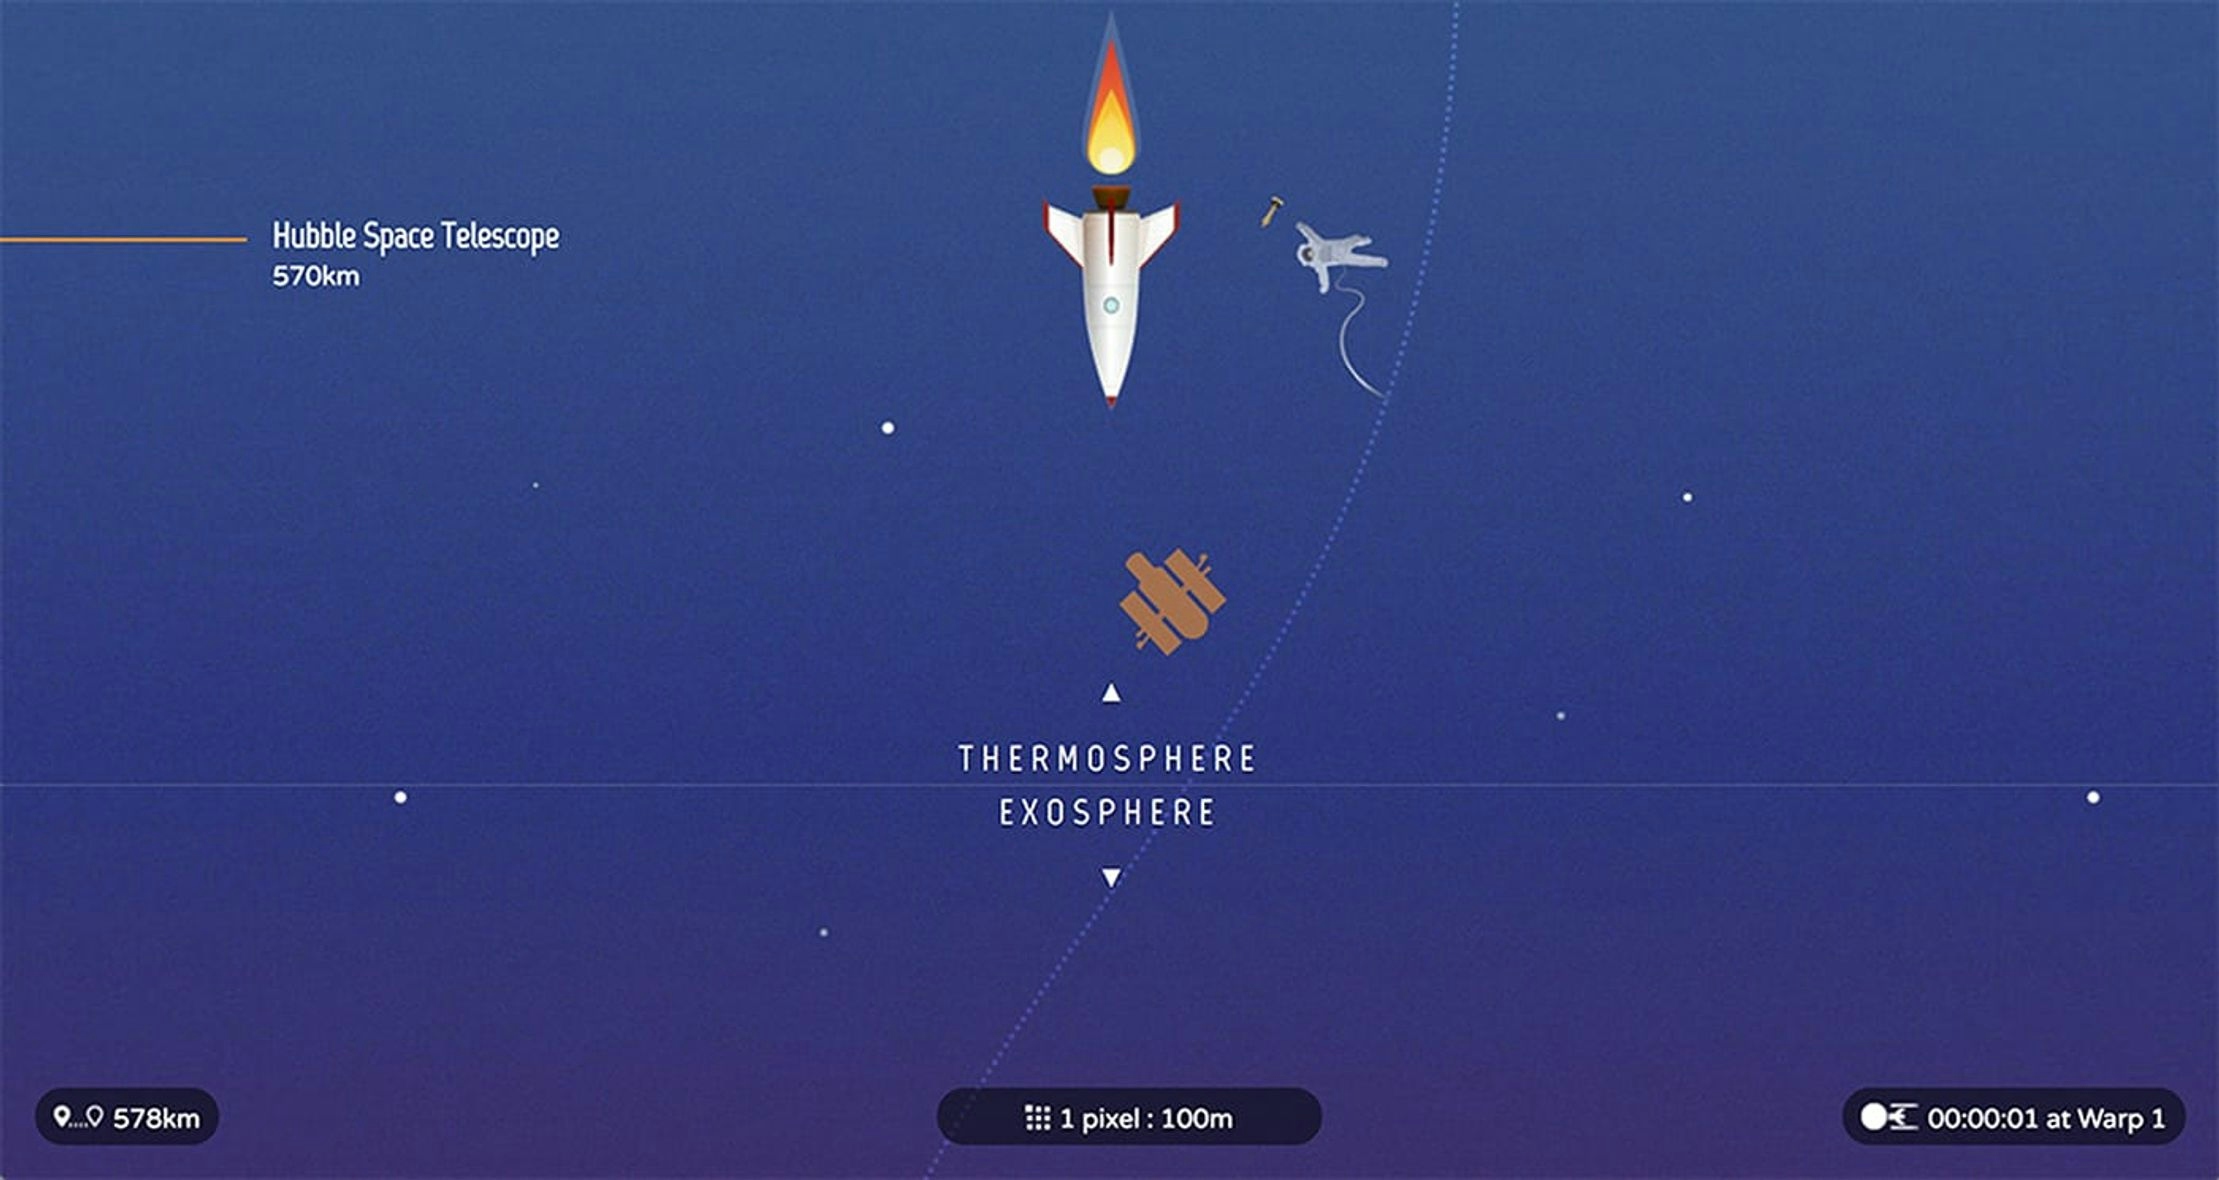 A screenshot from the 'Space Race' website. It shows an illustrated rocket flying down the page through space. On its left is a marker of the Hubble Space Telescope's orbit of 570km. Ahead of the rocket is a dotted line labeled. Above the line is the label 'thermosphere'. Below the line is the label 'exosphere'. In the background an illustrated spaceman floats in space.